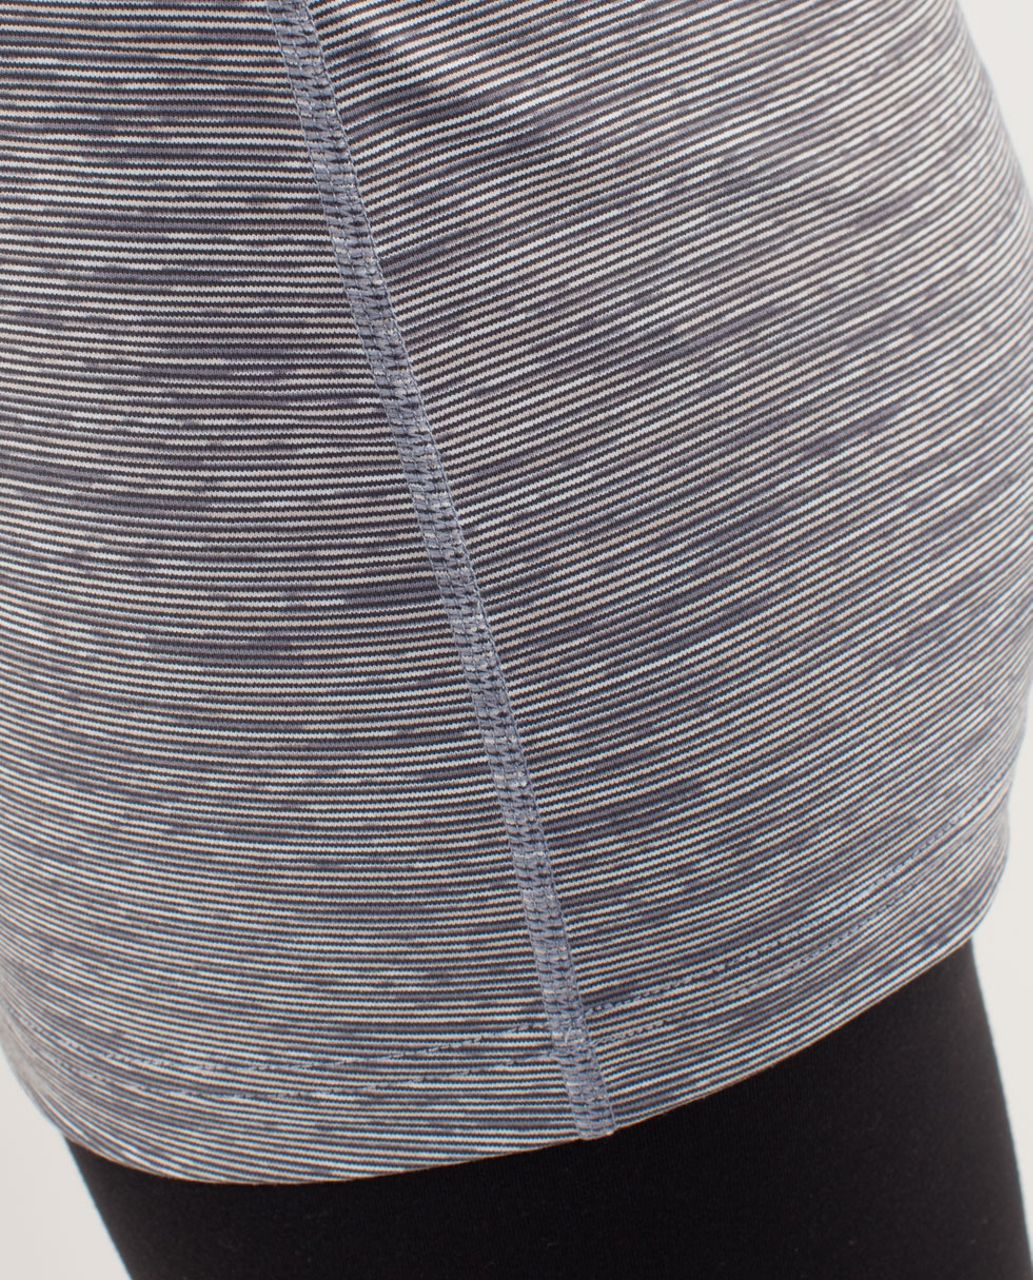 Lululemon Cool Racerback *Extra Long - Wee Are From Space Coal Fossil